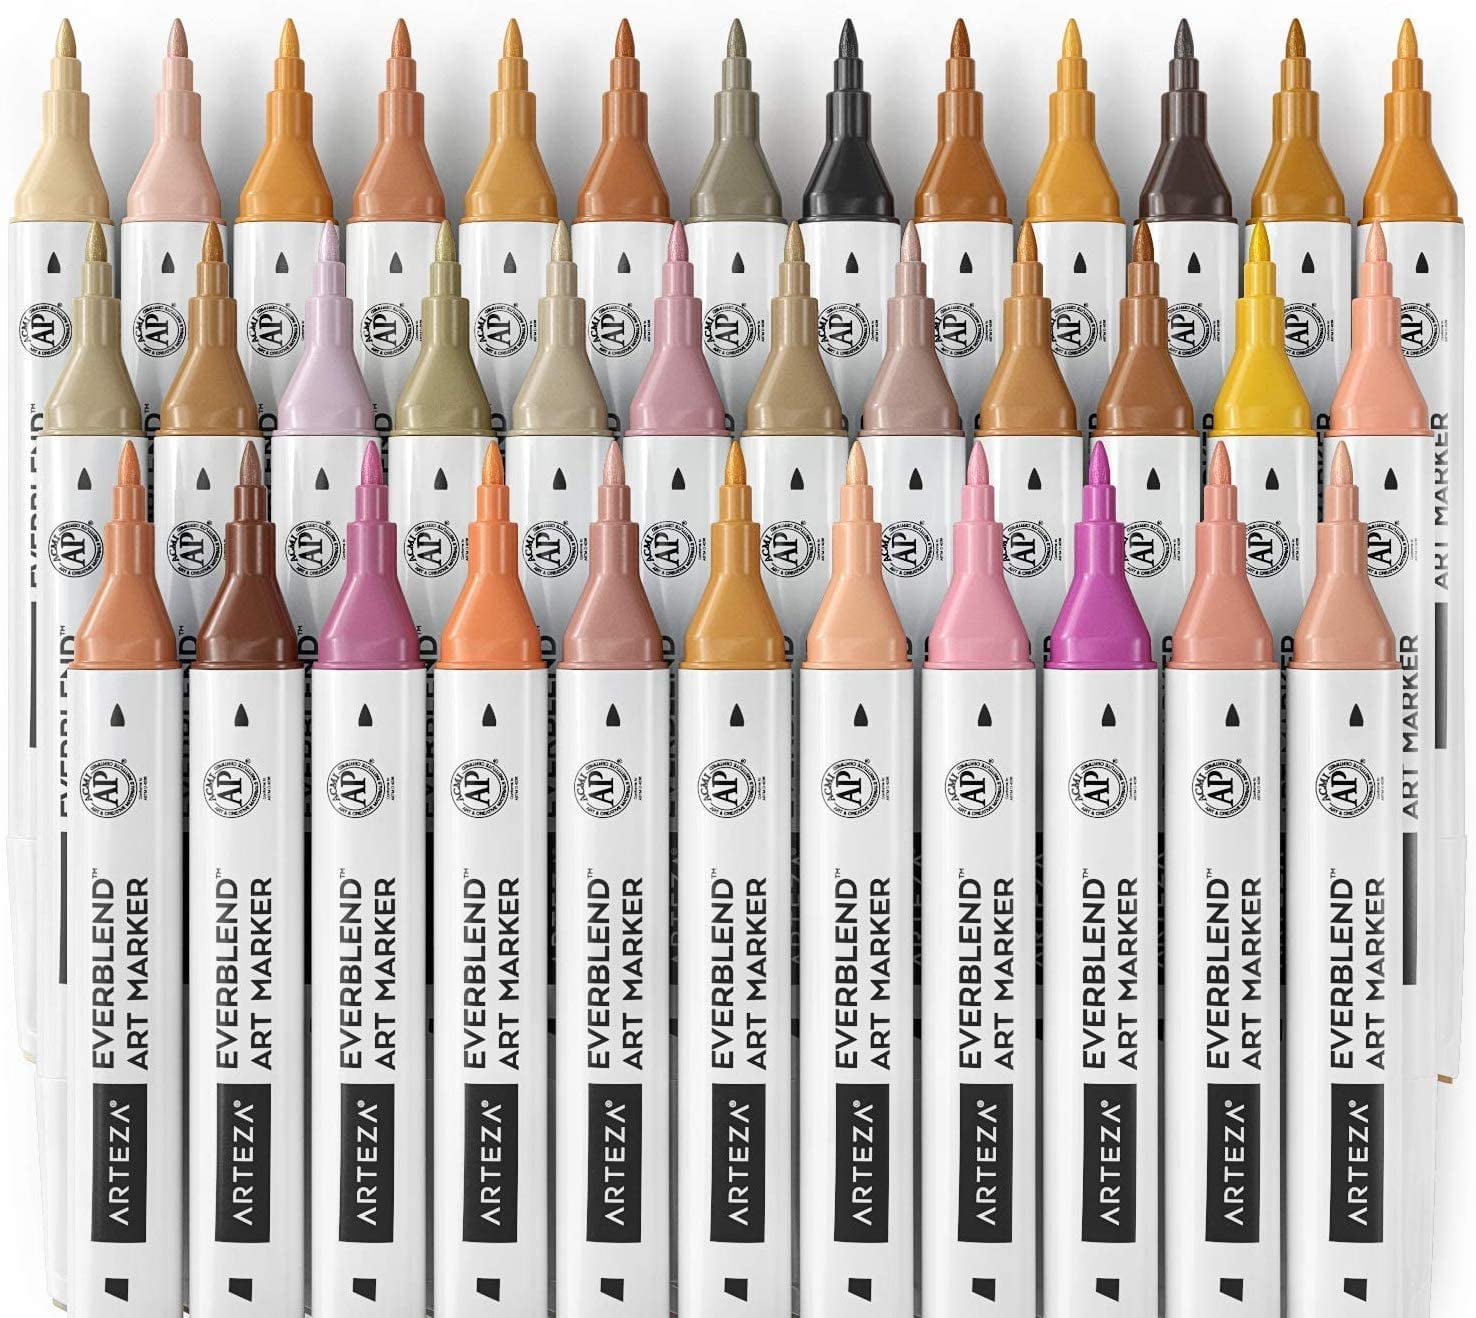 Arteza Professional EverBlend Dual Tip Ultra Artist Brush Sketch Markers,  Tropical Tones, Alcohol-Based, Replaceable Tips - 36 Pack